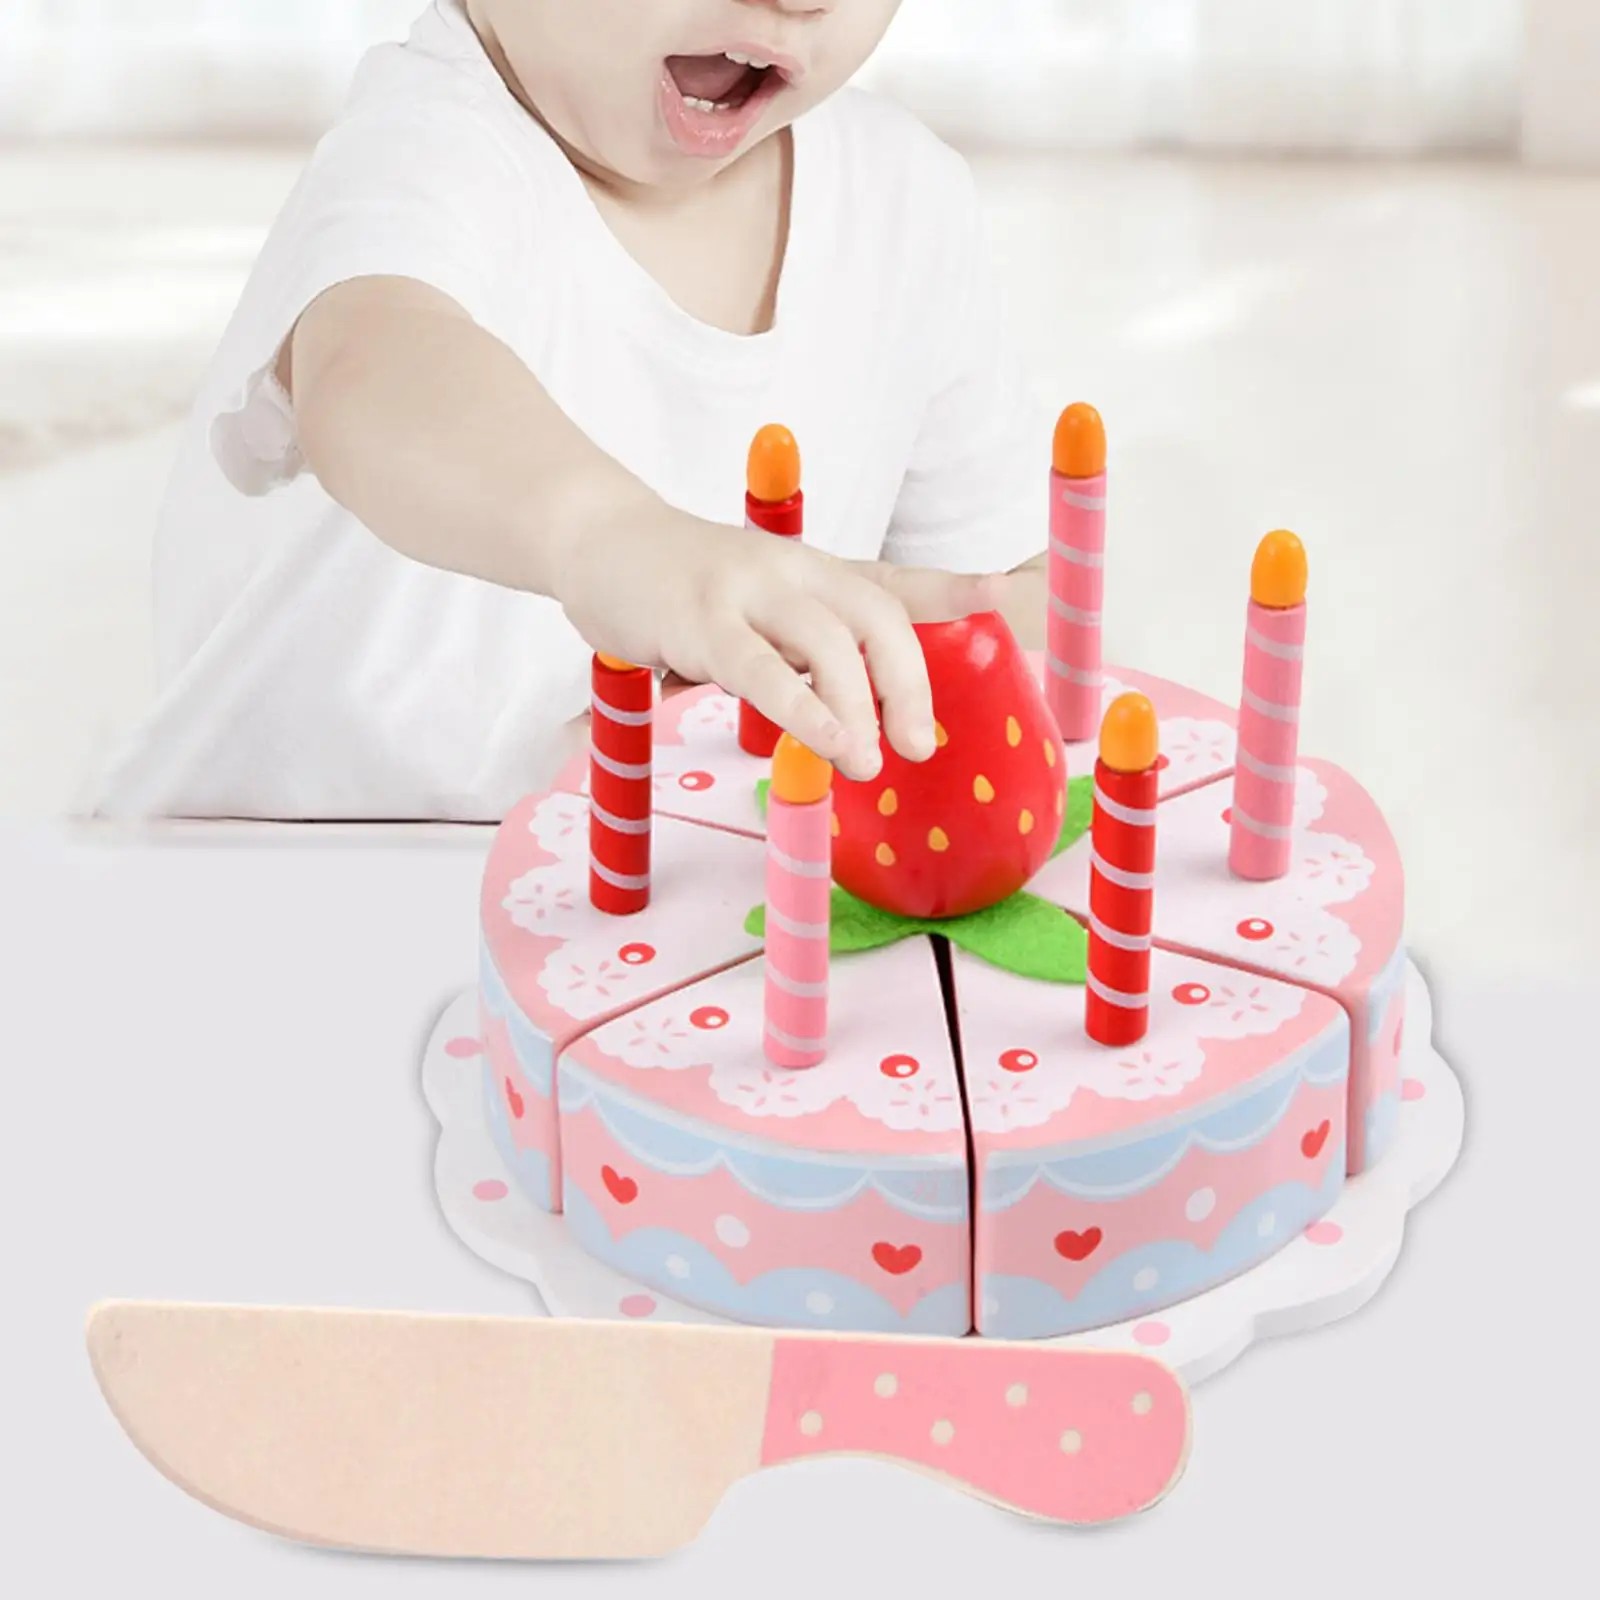 Kitchen Birthday Cake Toy, Cutting Cake Playset Role Play Toys Food Pretend Play for Kids Holiday Gift